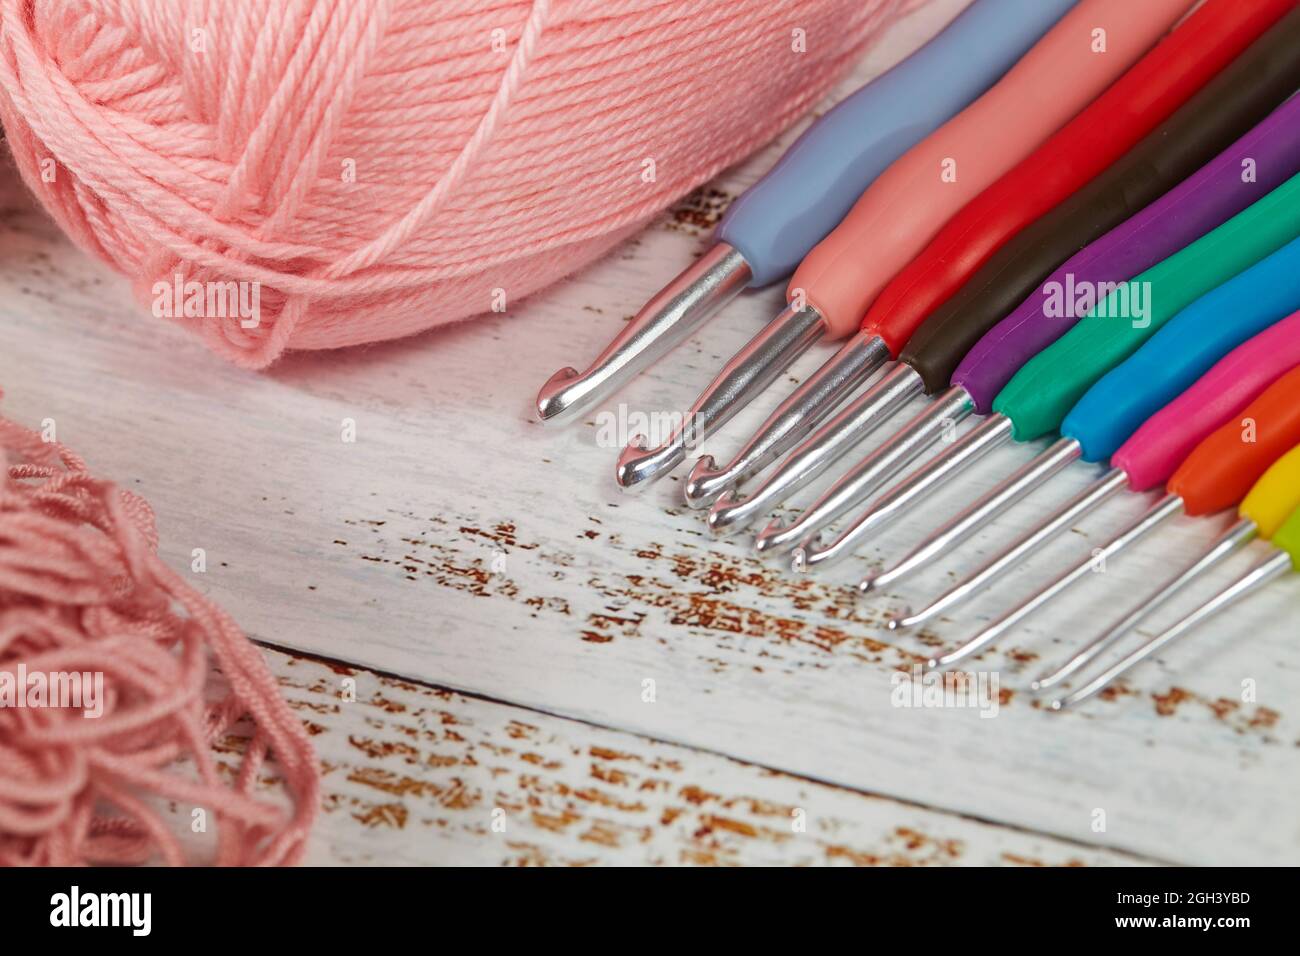 knitting pink crochet hooks and woolen thread on a blue background